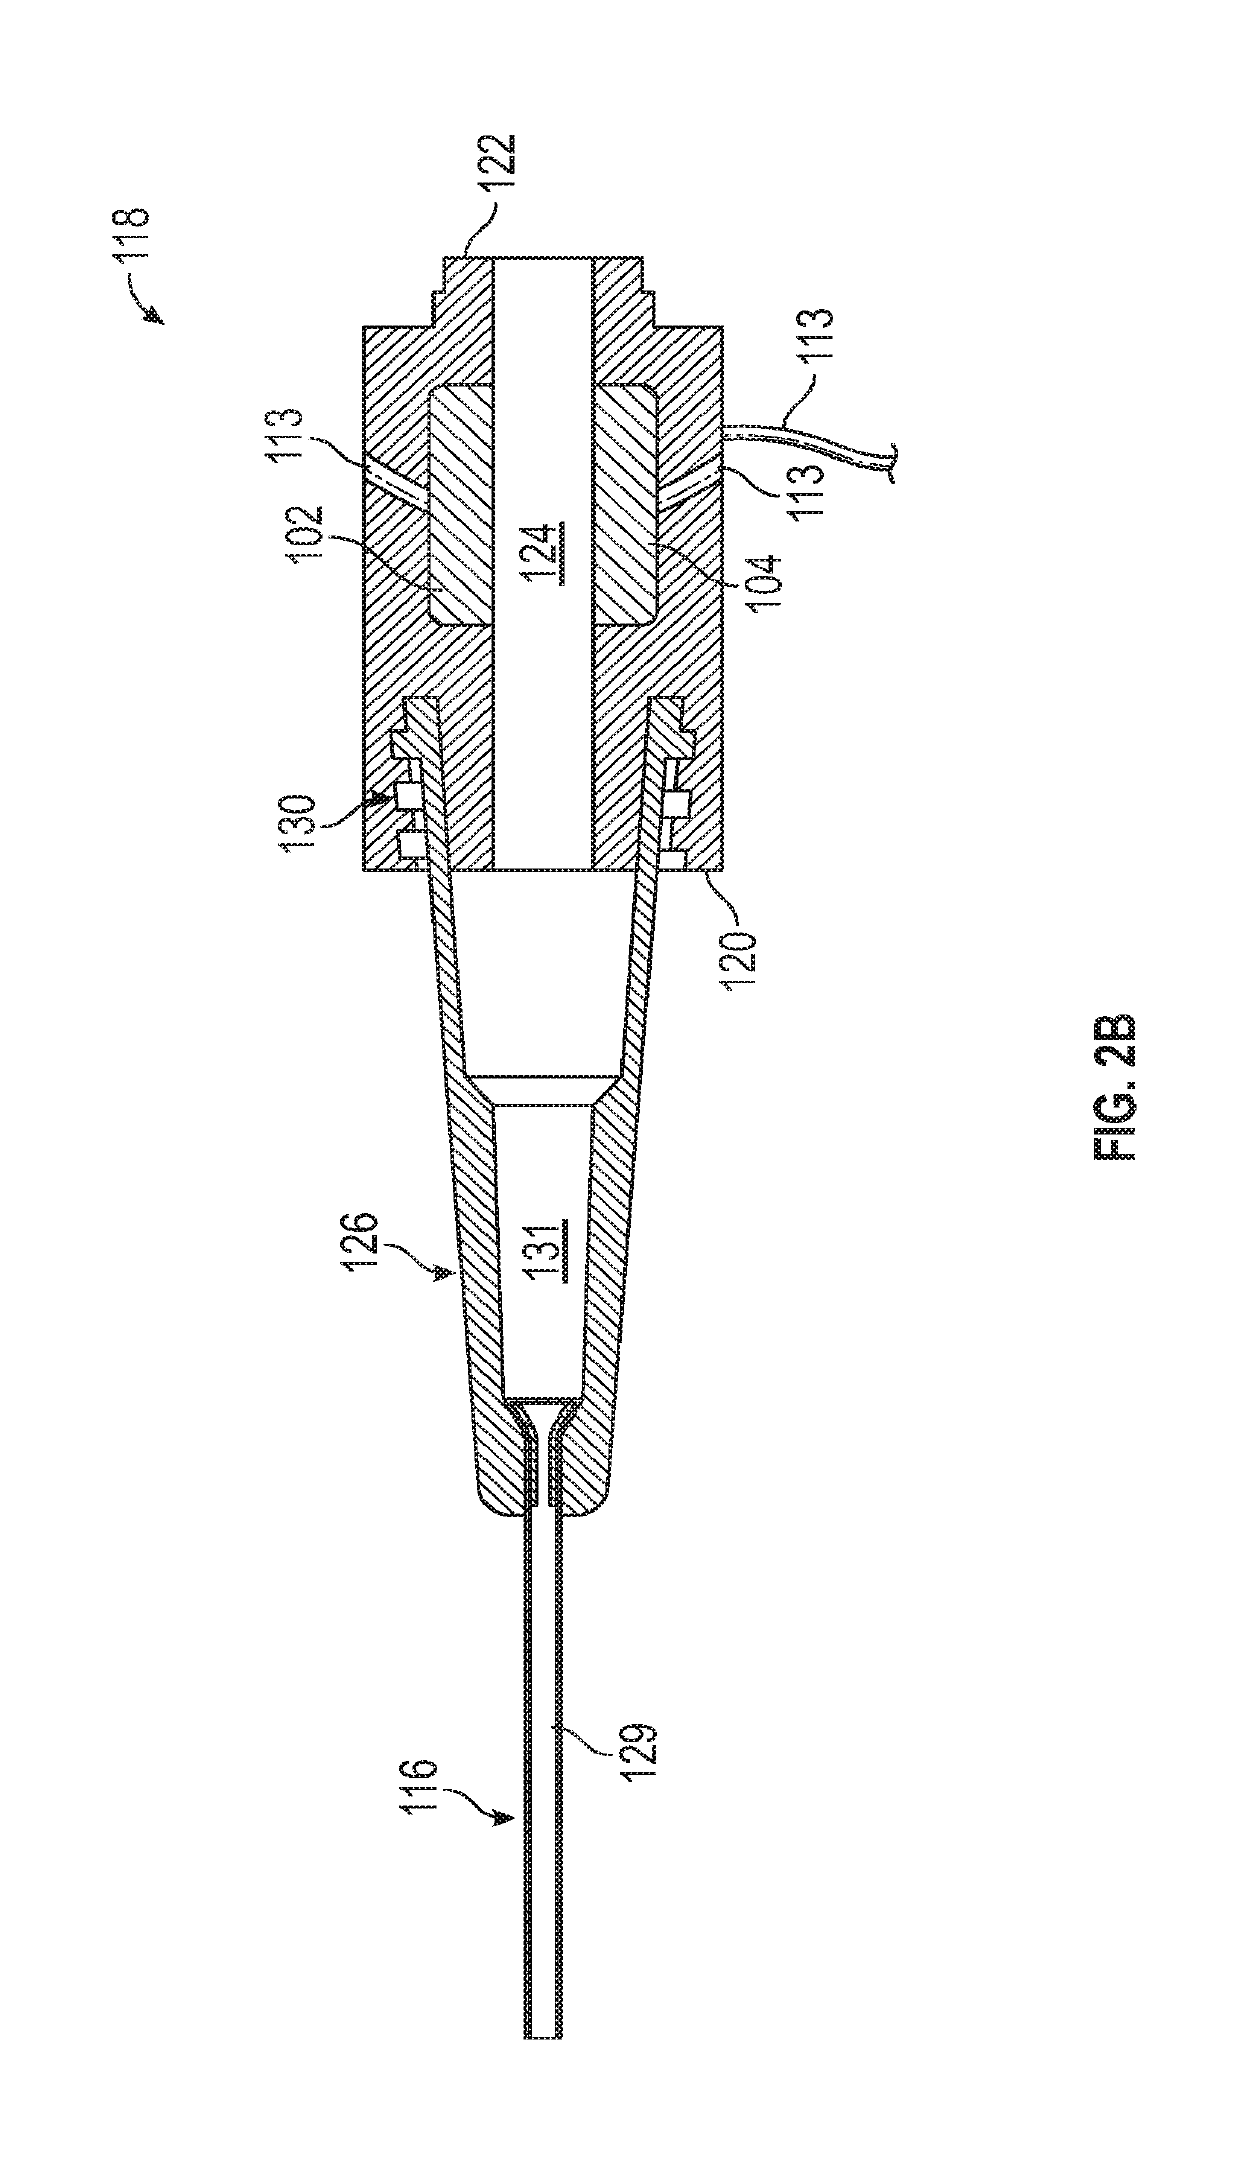 Systems and methods to prevent catheter occlusion